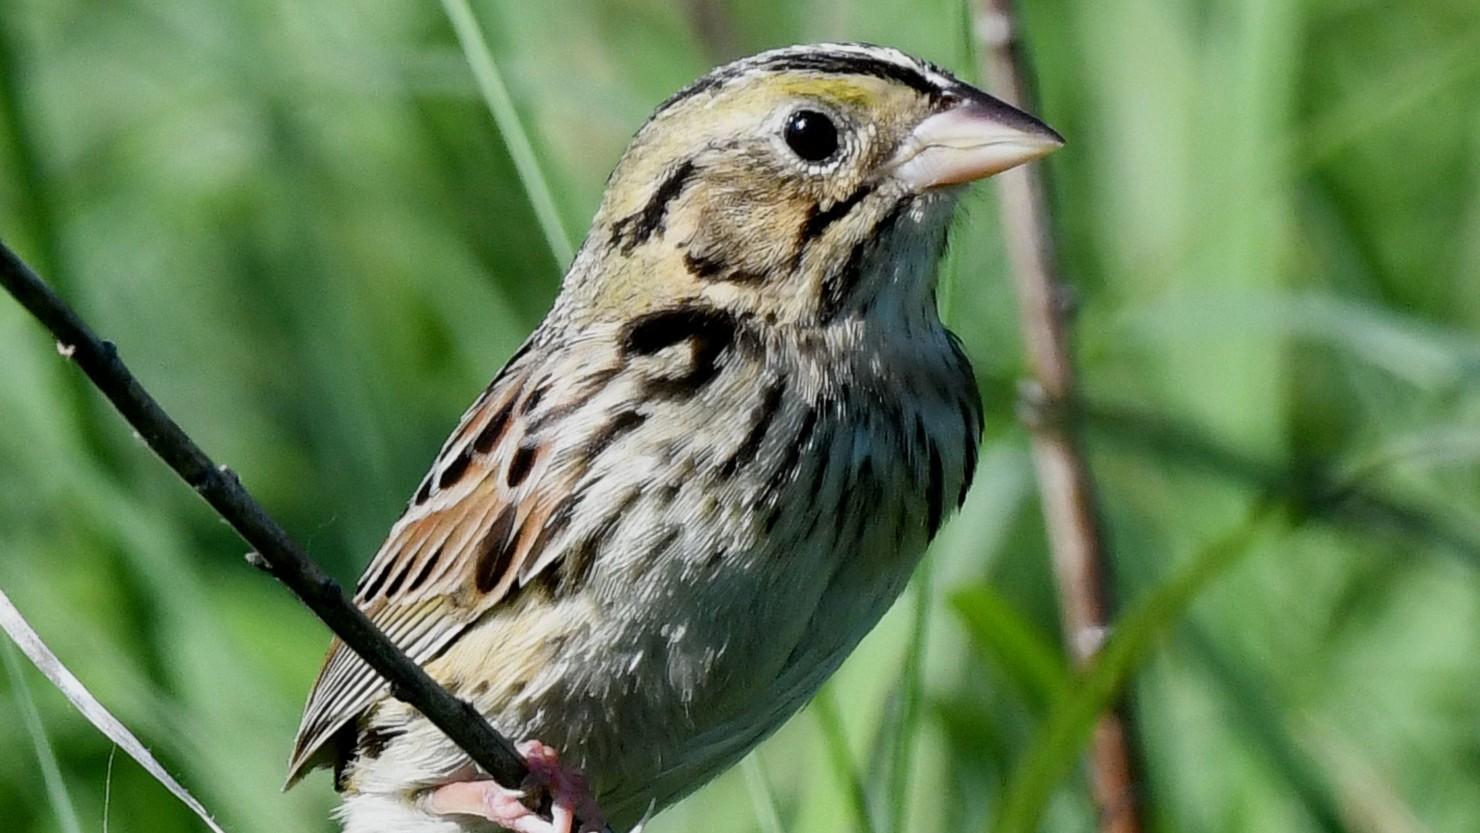 A Henslow's sparrow, named for John Stevens Henslow, a mentor to Charles Darwin. This grassland bird has been in decline due to loss of habitat. (Jim Hudgins / U.S. Fish & Wildlife Service Midwest Region). 